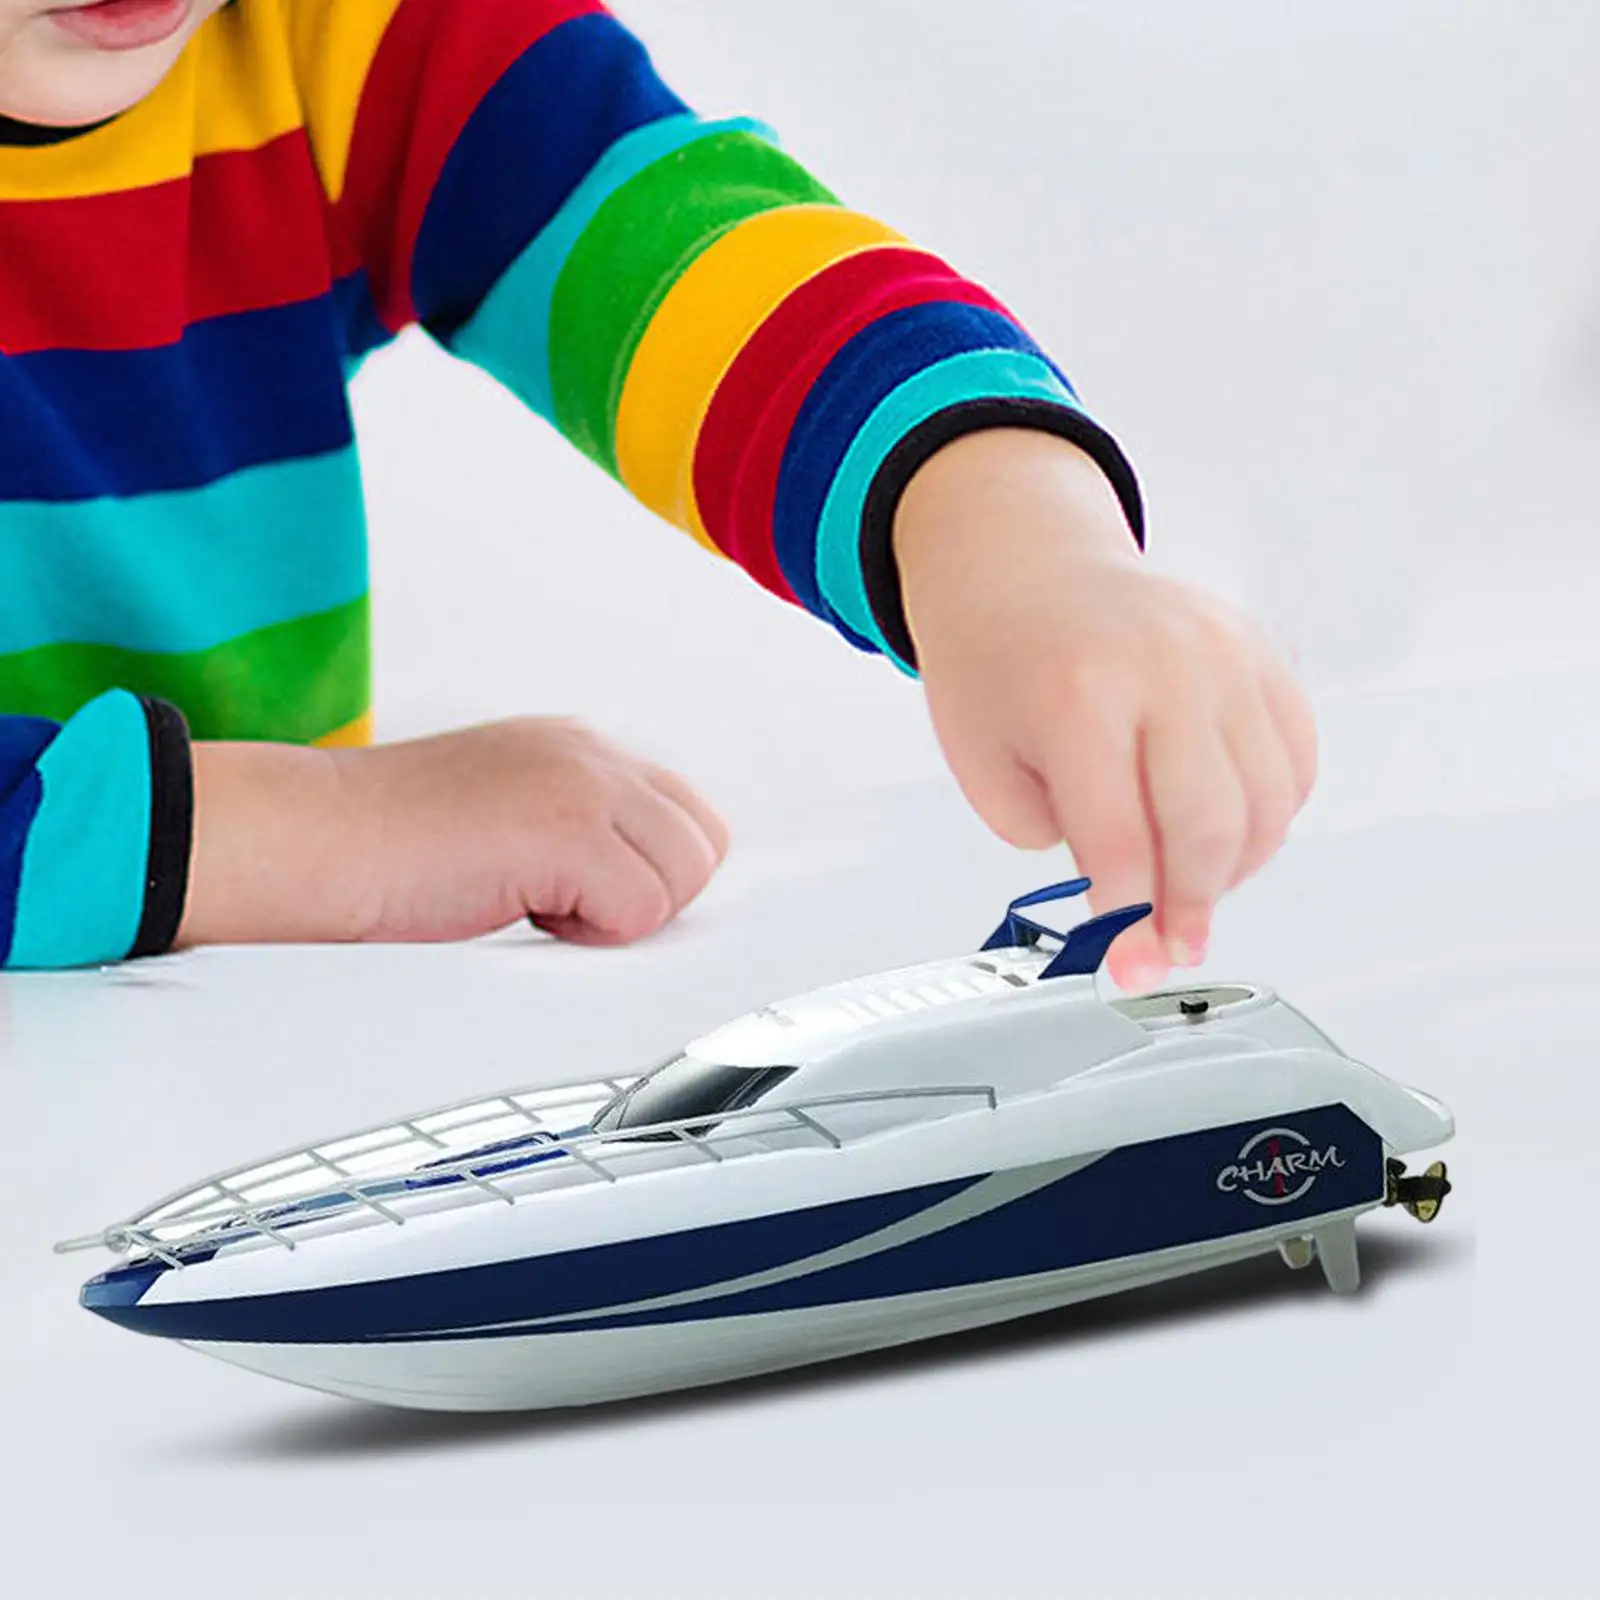 Portable Remote Control Boat Water Toy Boat USB Rechargeable Warship Model RC Boat for Children Boys Girls Beginner Gifts